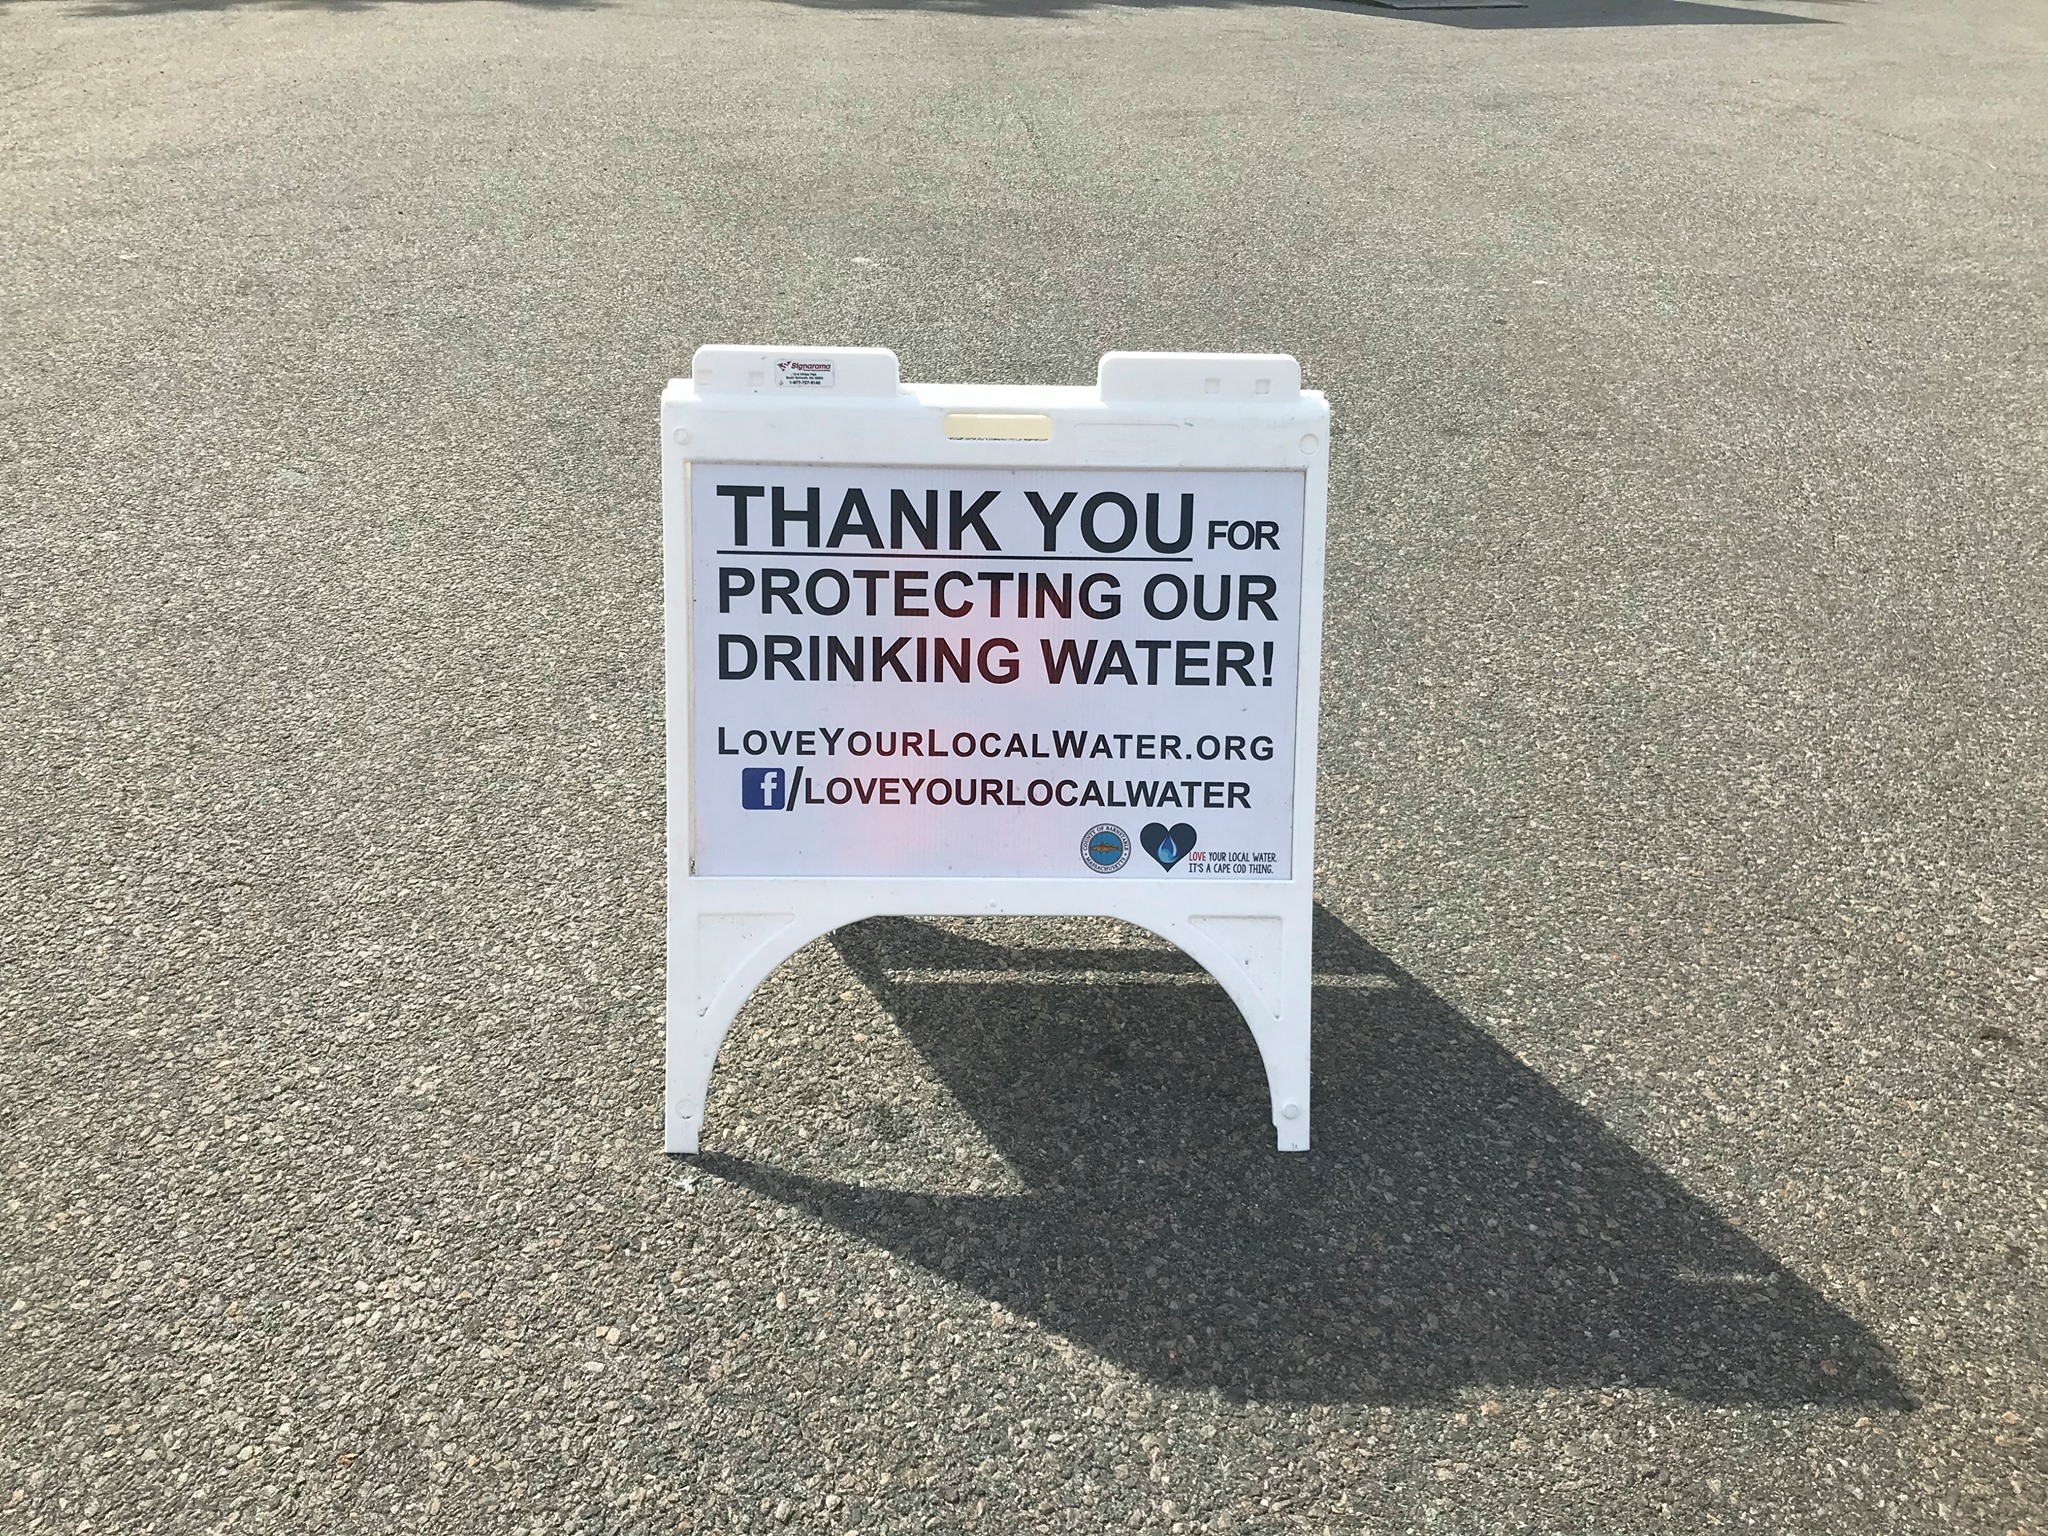 Thank you for protecting our drinking water.